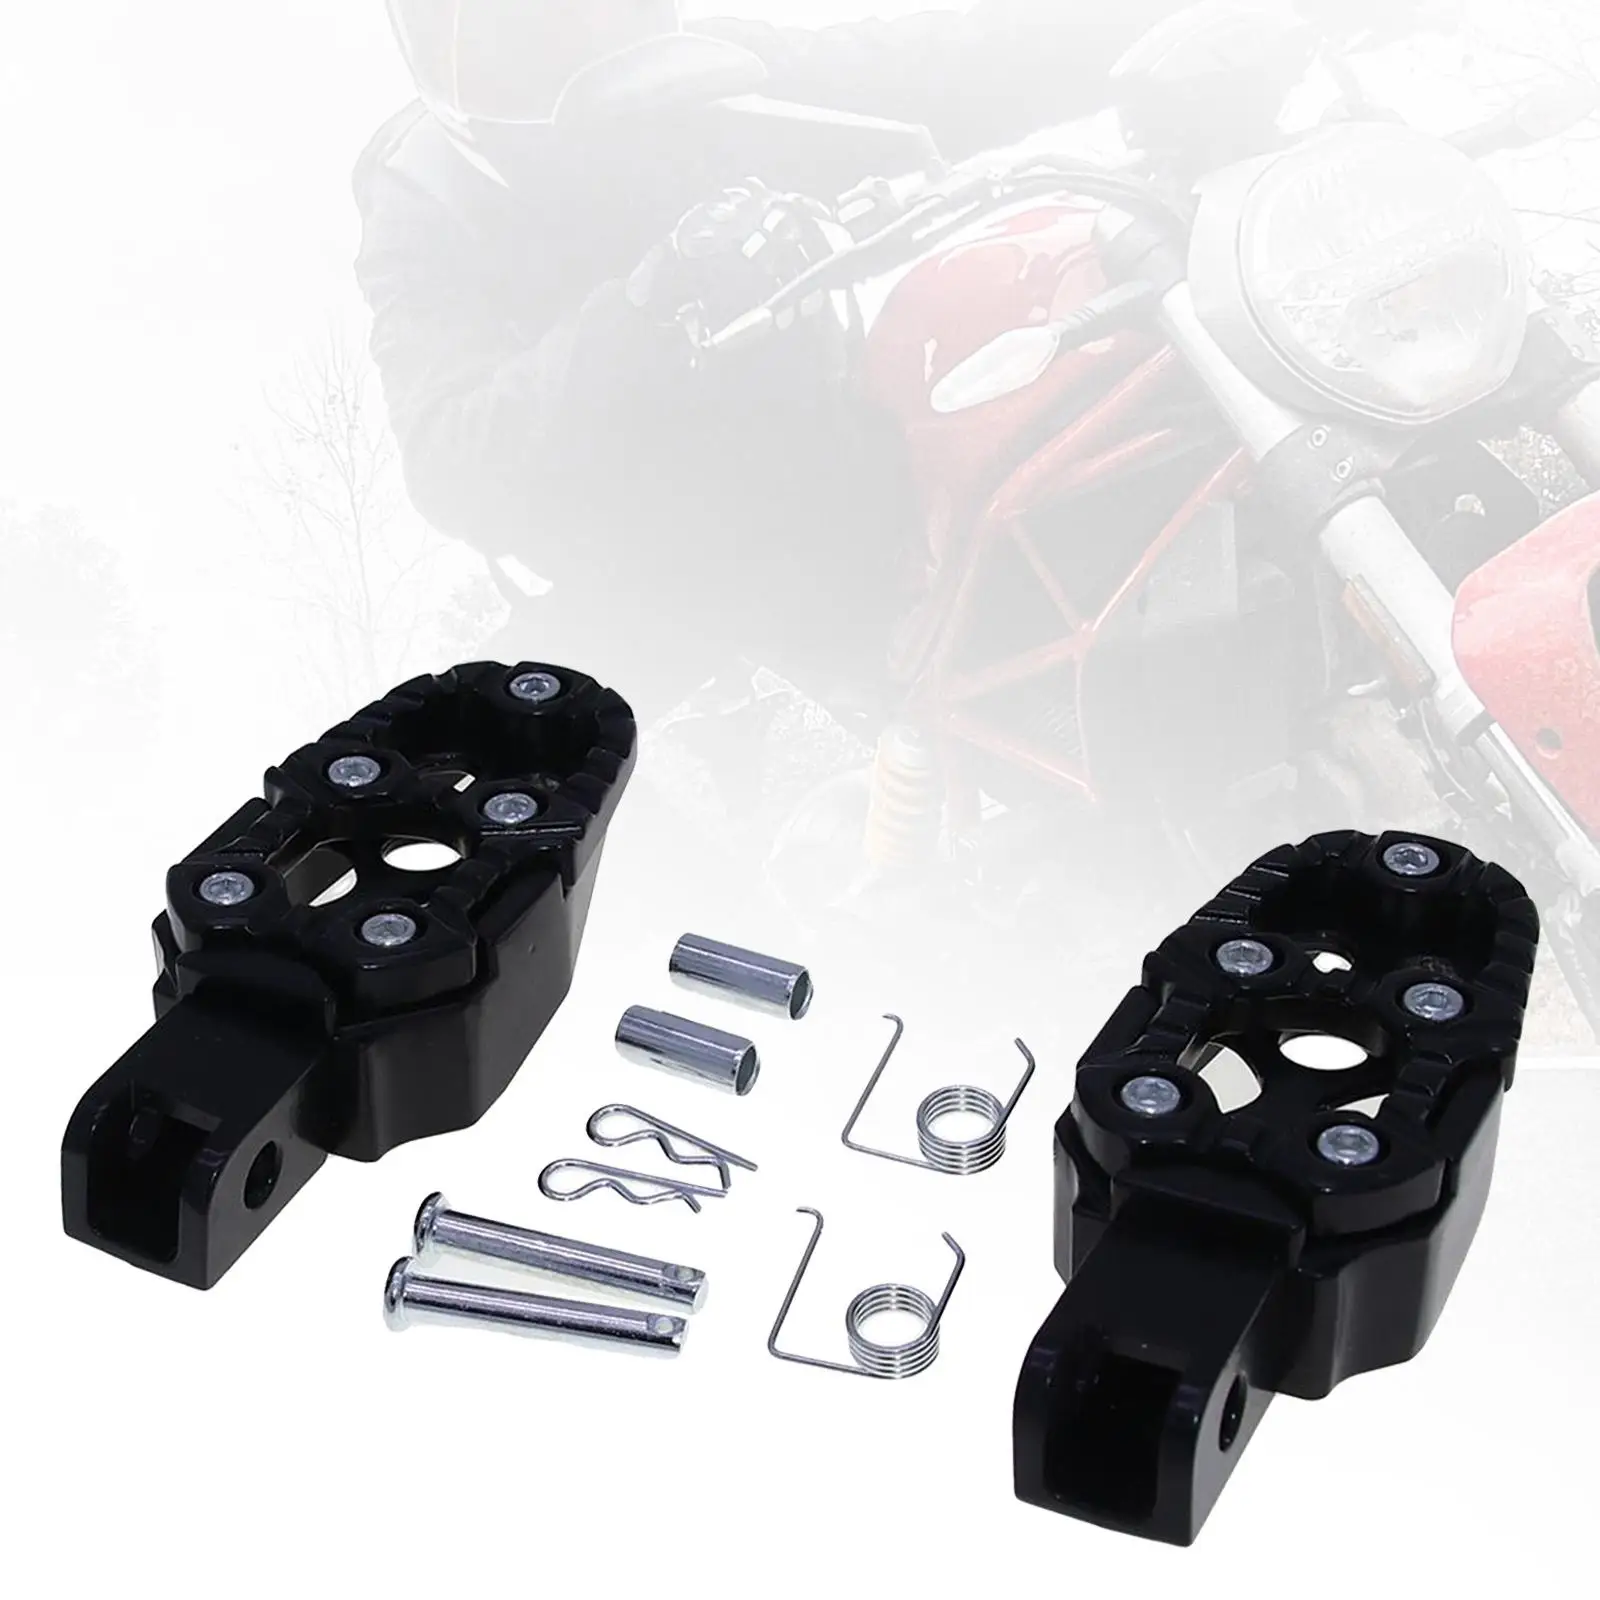 Foot Pedals Rests Professional Rotatable Universal Accessories Portable Aluminum Alloy Stablize Motorcycle Back Foot Pegs